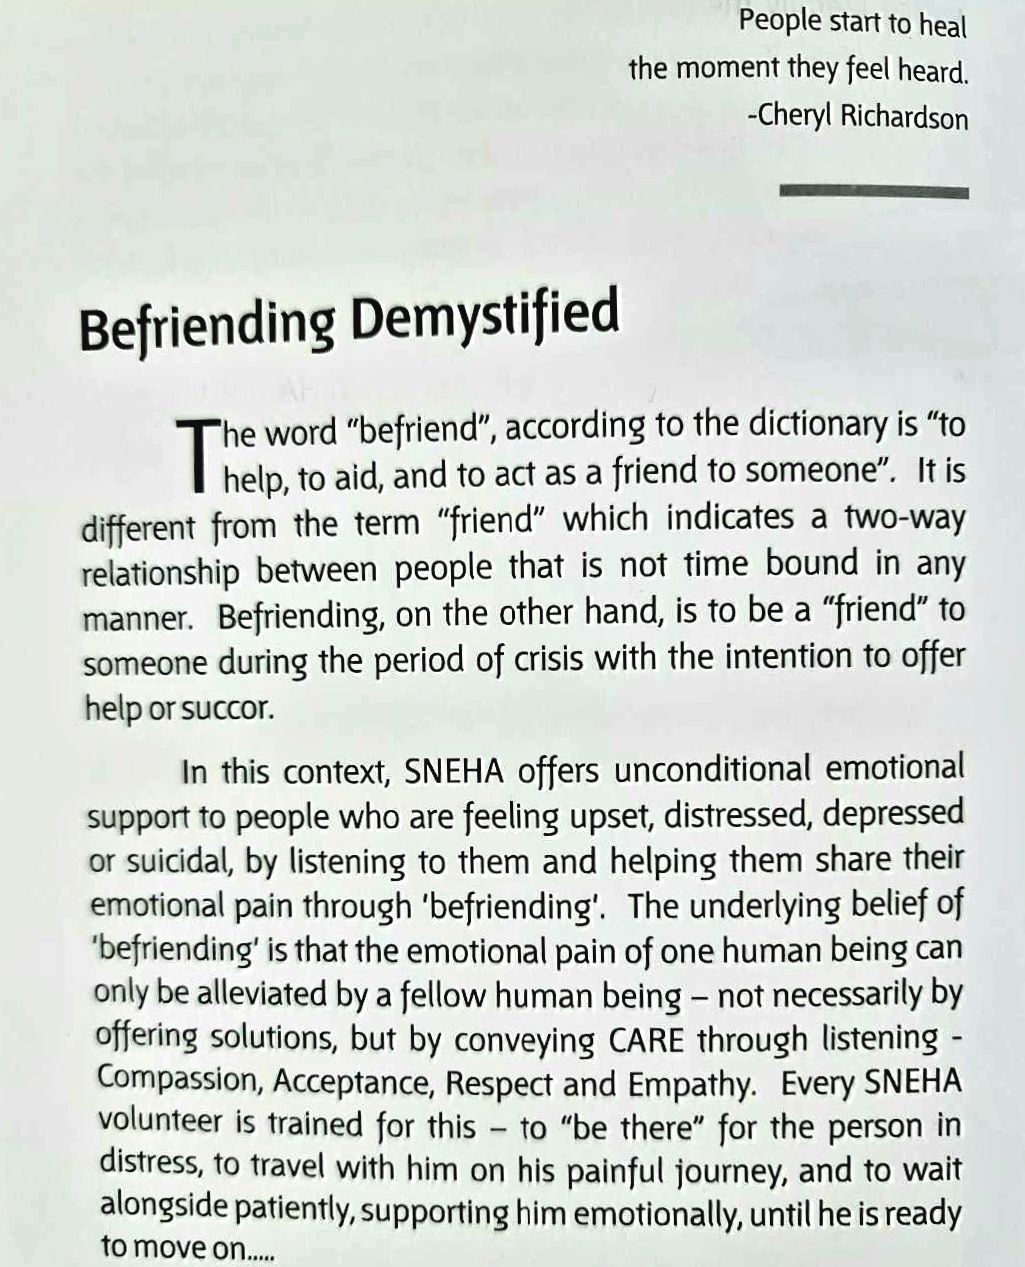 A page from the book with this core message: The underlying belief of befriending is that the emotional pain of one human being can only be alleviated by a fellow human being - not necessarily by offering solutions, but by conveying CARE through listening - Compassion, Acceptance, Respect, and Empathy.